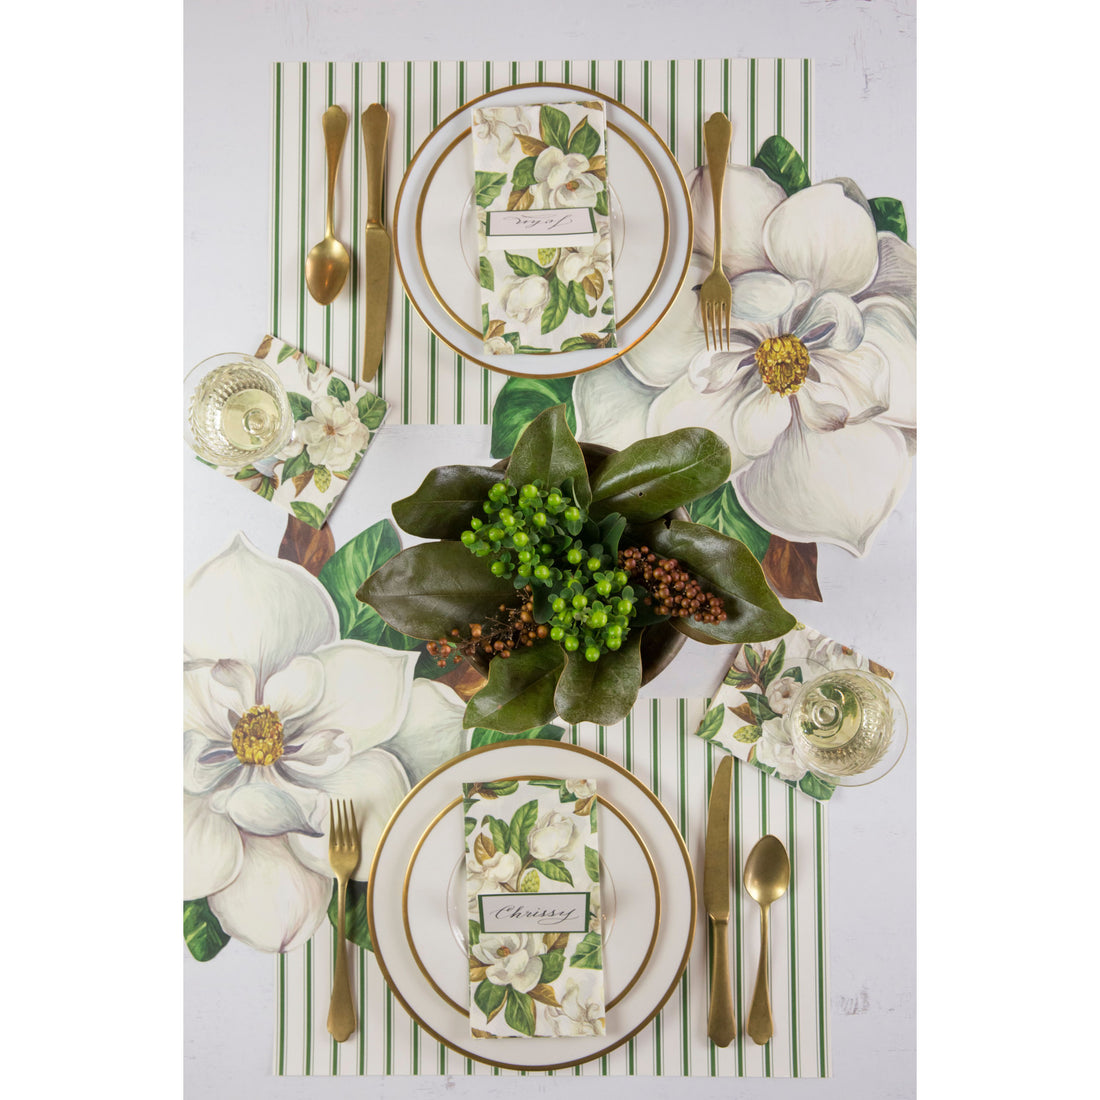 The Green Ribbon Stripe Placemat under an elegant table setting for two, from above.